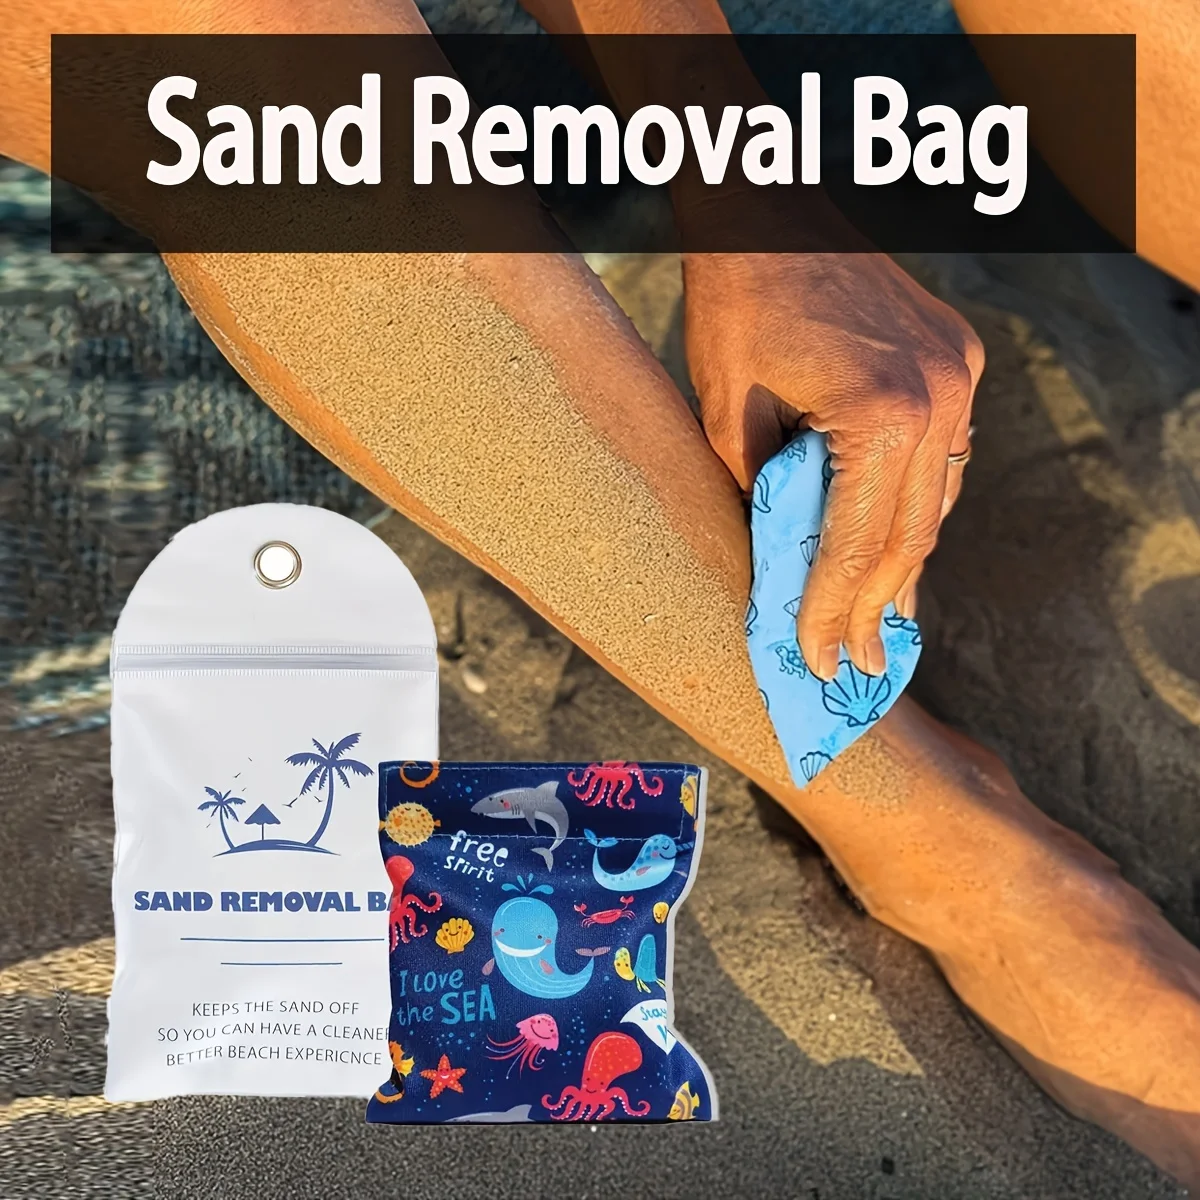 Sand Removal Bag,Summer Beach Party Gifts,Sand Remover For Beach, Powder Pouch Sand Remover Brush Beach Vacation Camping